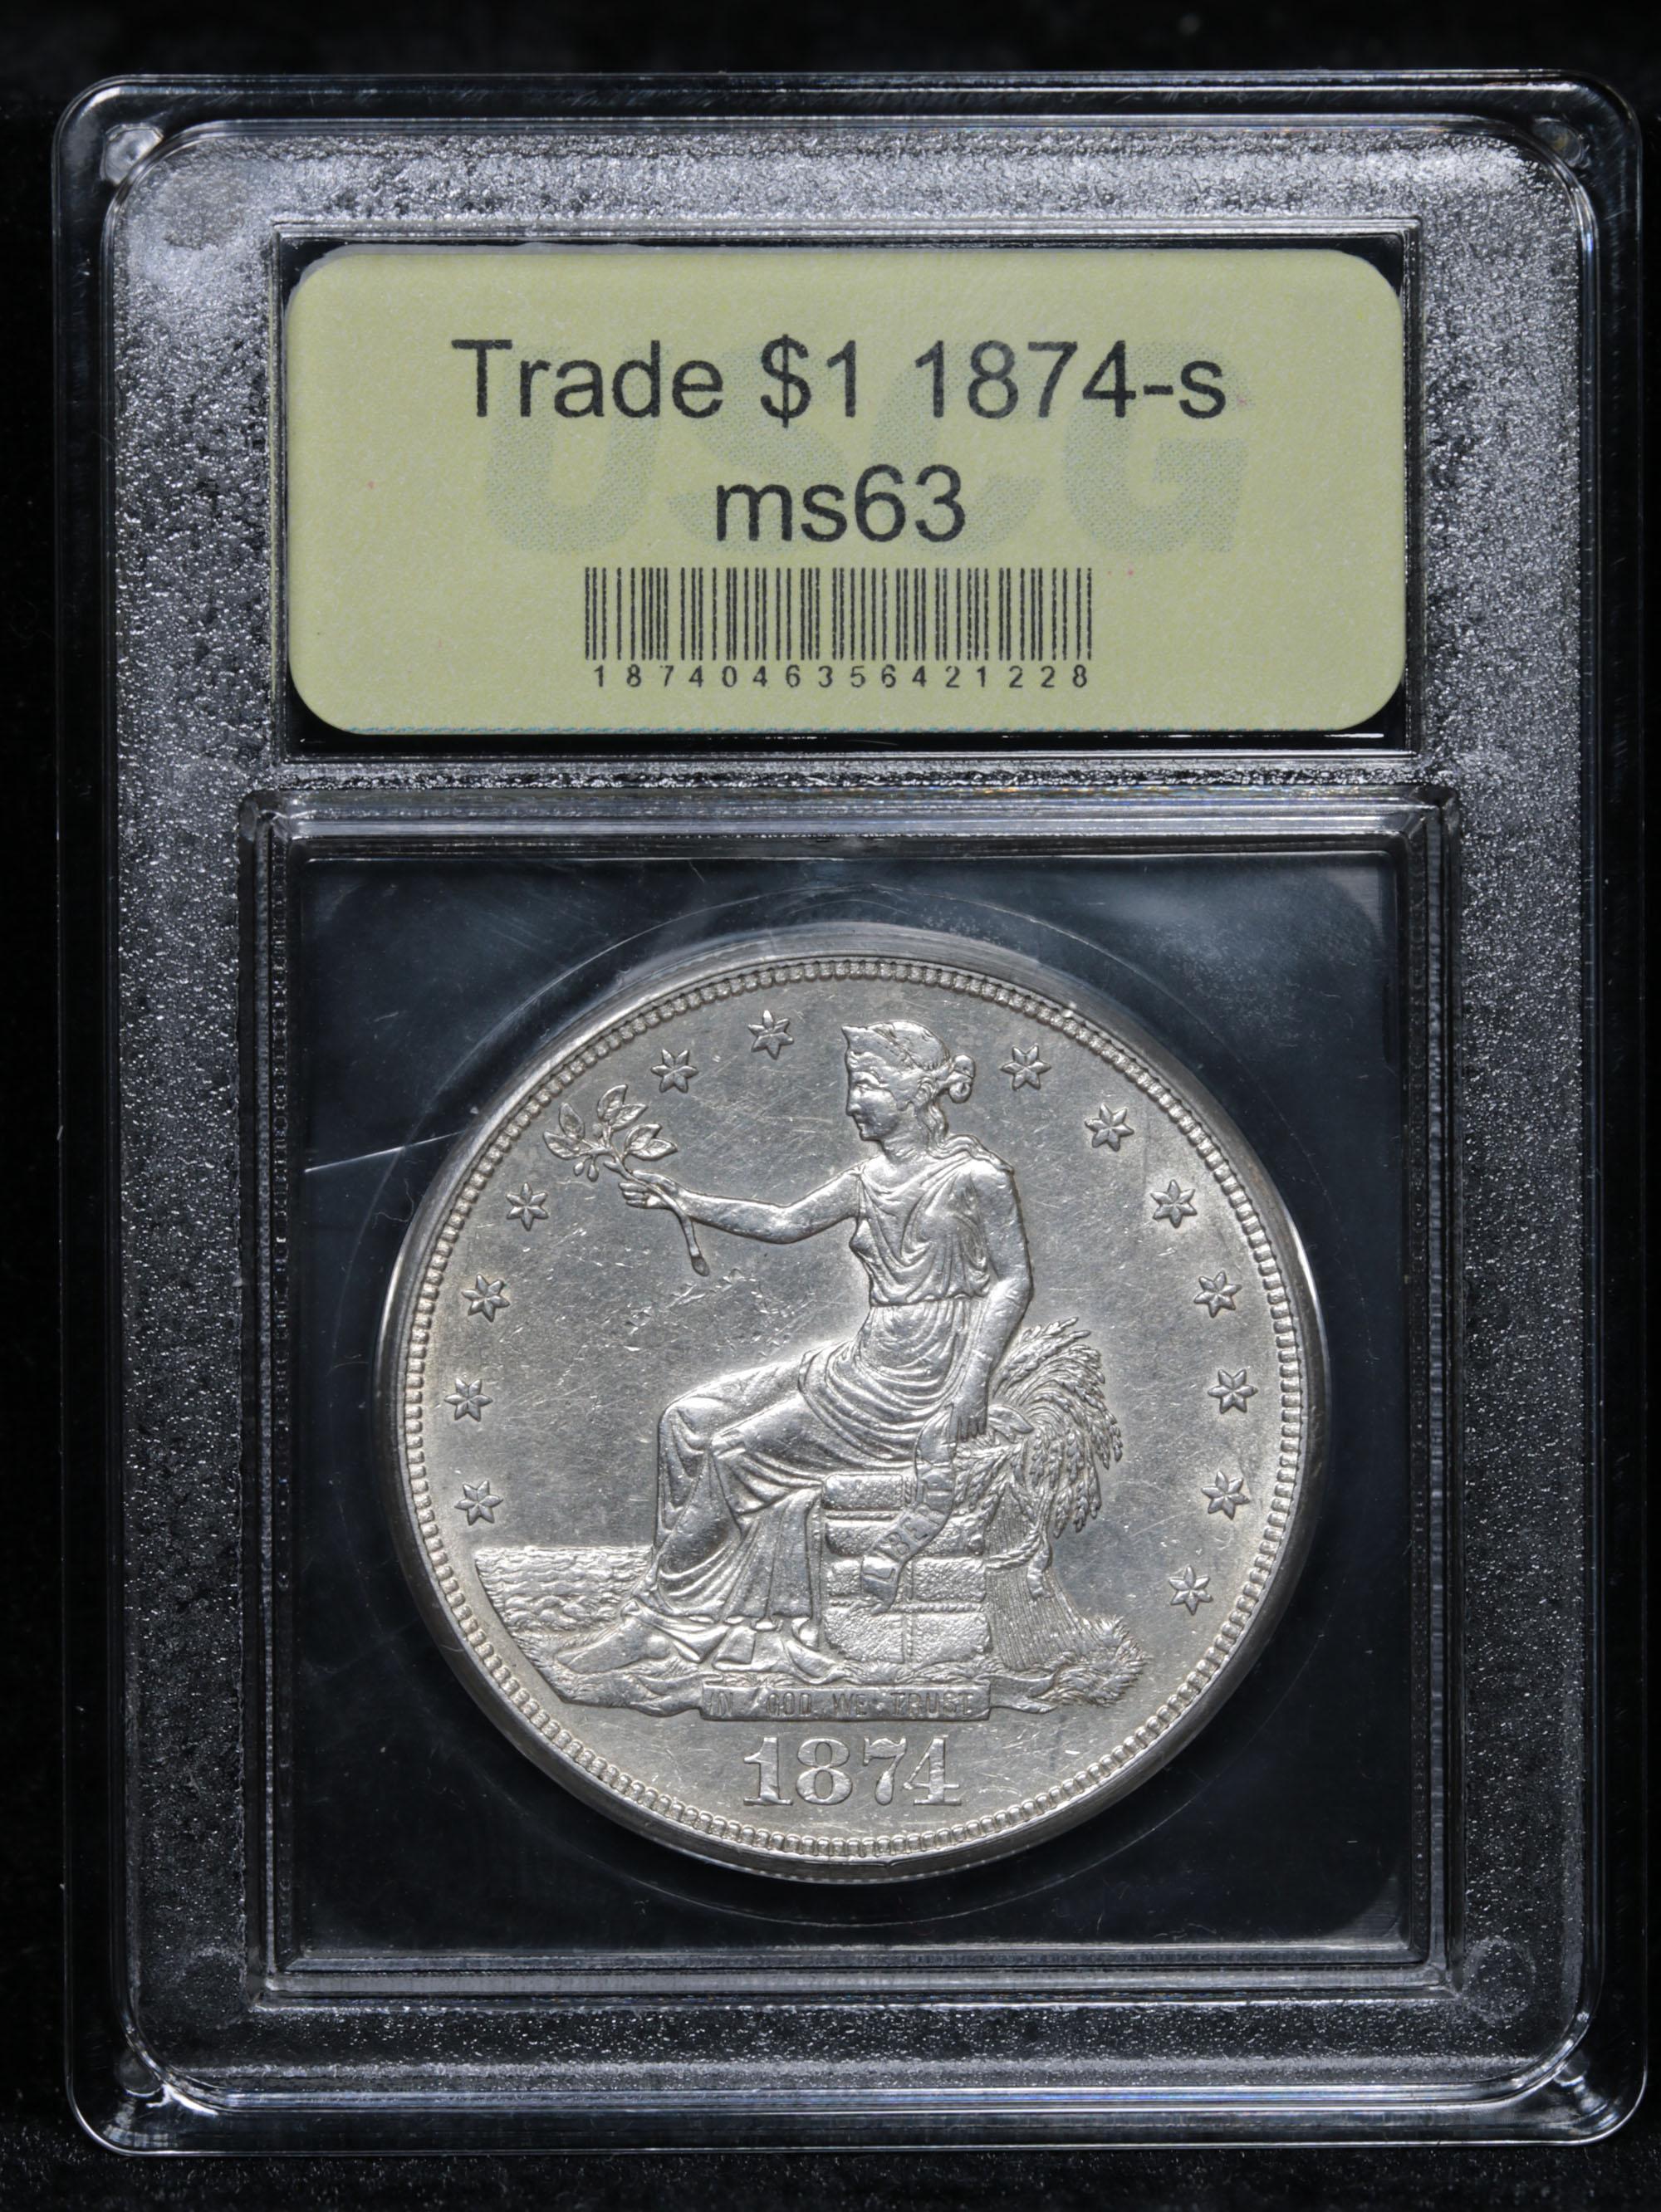 ***Auction Highlight*** 1874-s Trade Dollar $1 Graded Select Unc By USCG (fc)